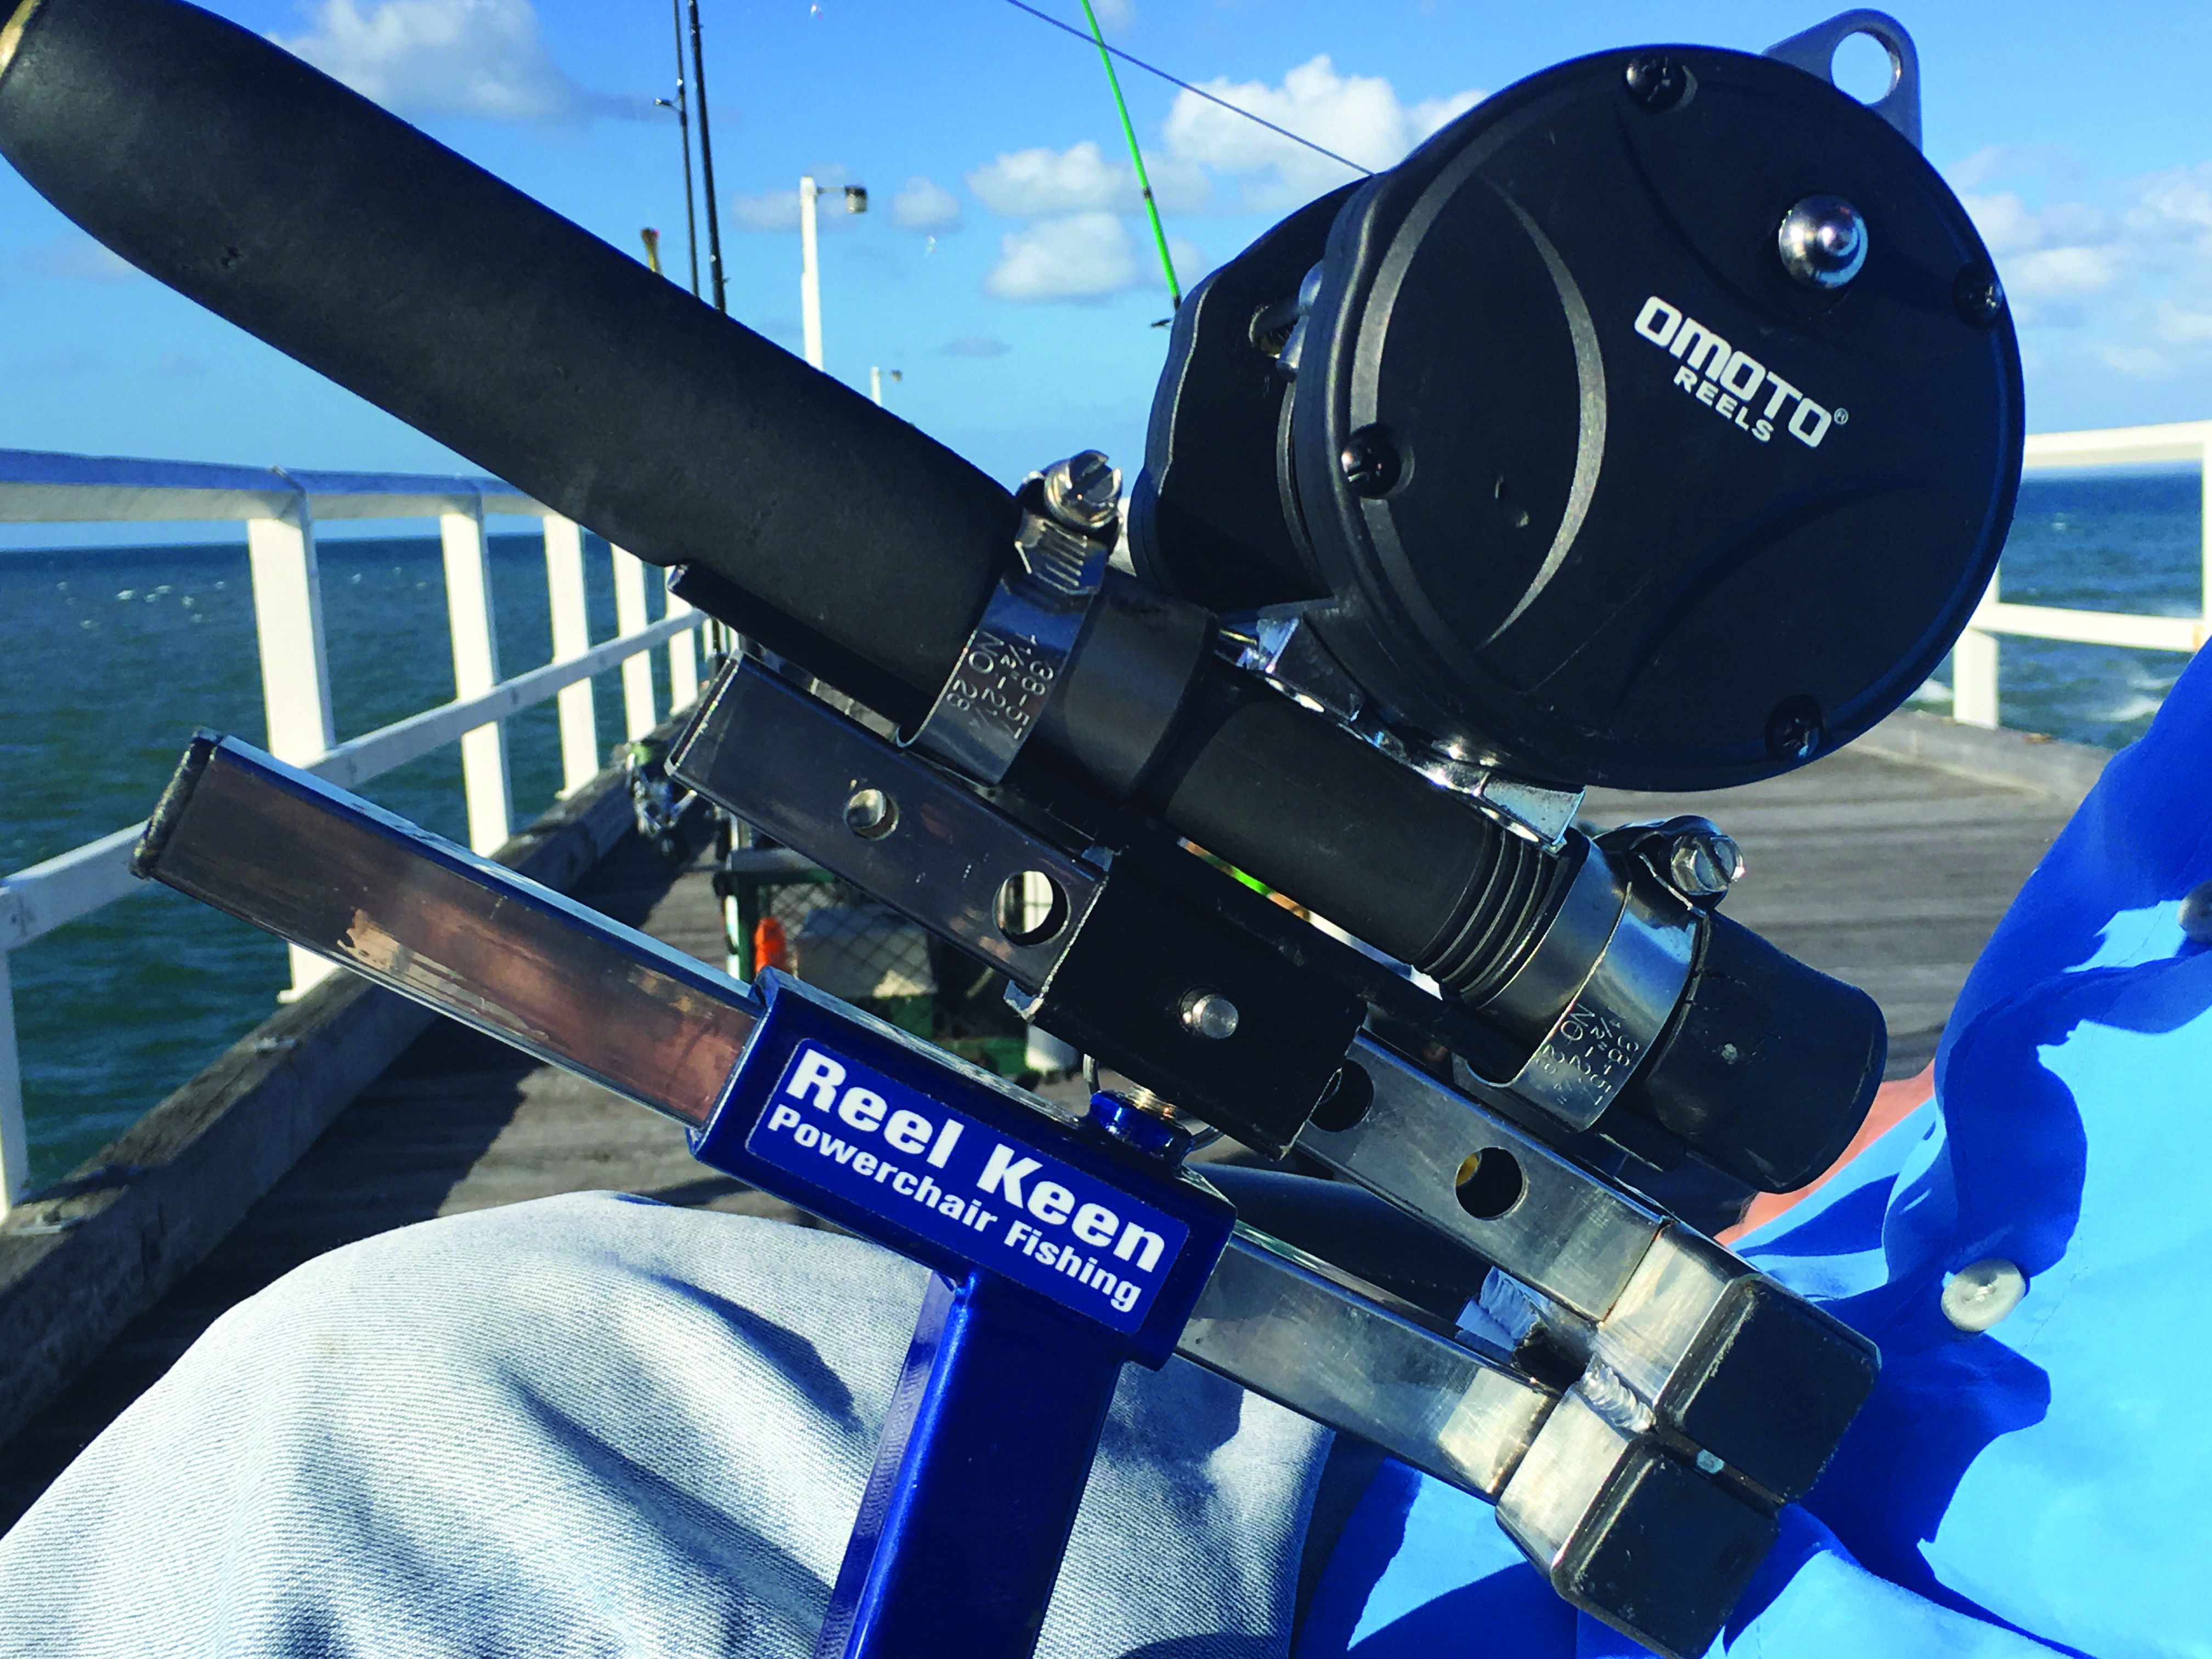 The fishing rod holder created by Queensland inventor Rob Agius.